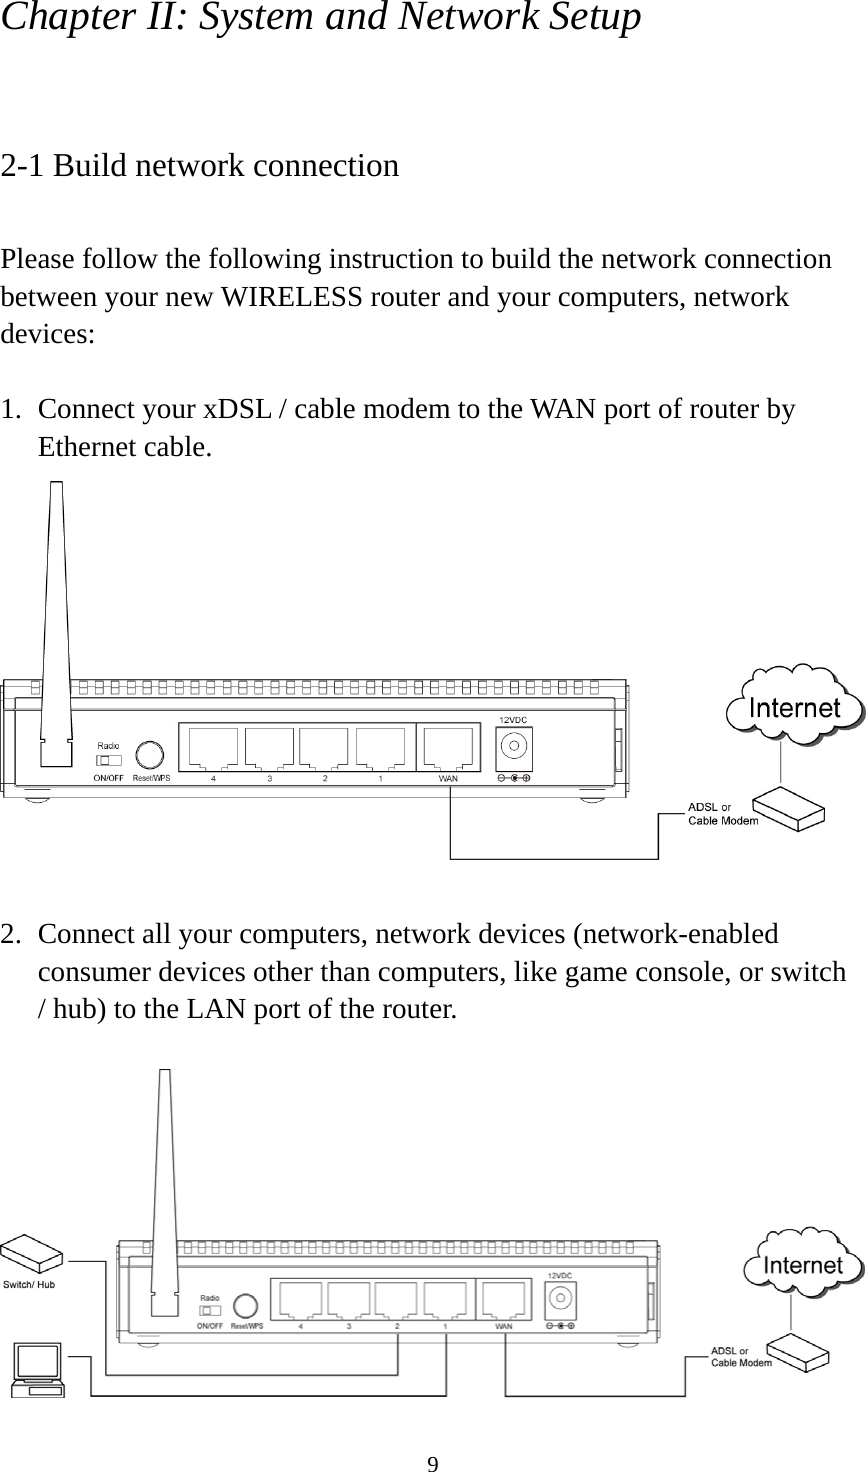 9 Chapter II: System and Network Setup  2-1 Build network connection  Please follow the following instruction to build the network connection between your new WIRELESS router and your computers, network devices:  1. Connect your xDSL / cable modem to the WAN port of router by Ethernet cable.     2. Connect all your computers, network devices (network-enabled consumer devices other than computers, like game console, or switch / hub) to the LAN port of the router.   